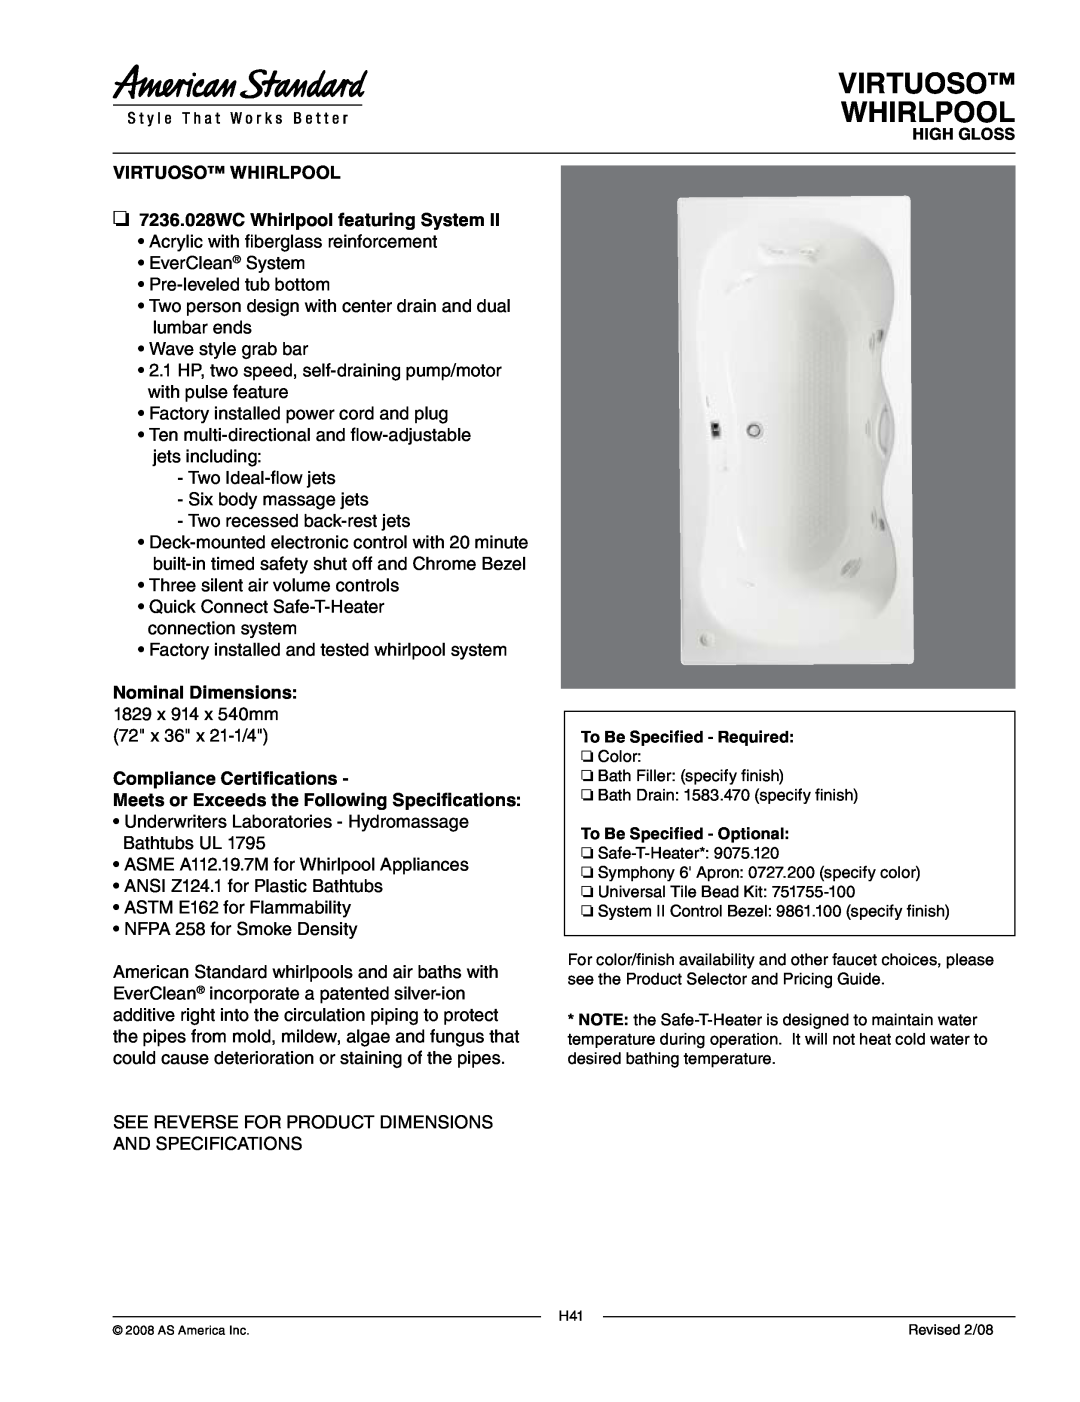 American Standard dimensions Virtuoso Whirlpool, 7236.028WC Whirlpool featuring System, Nominal Dimensions 